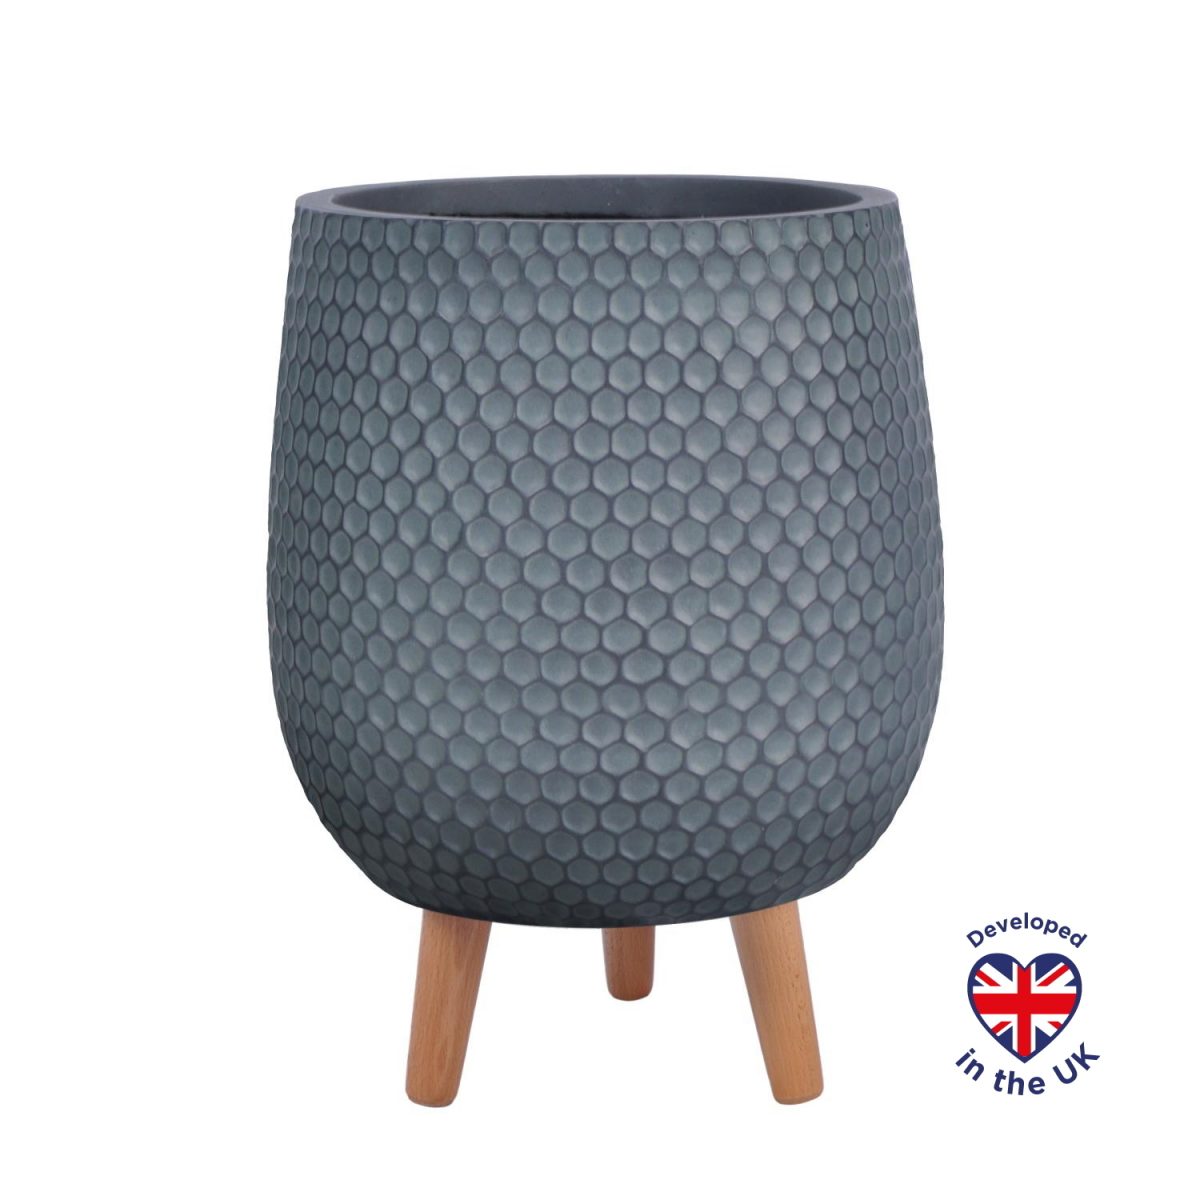 Honeycomb Style Slate Grey Indoor Egg Planter with Legs D32 H43 cm, 21.9 ltrs Cap.